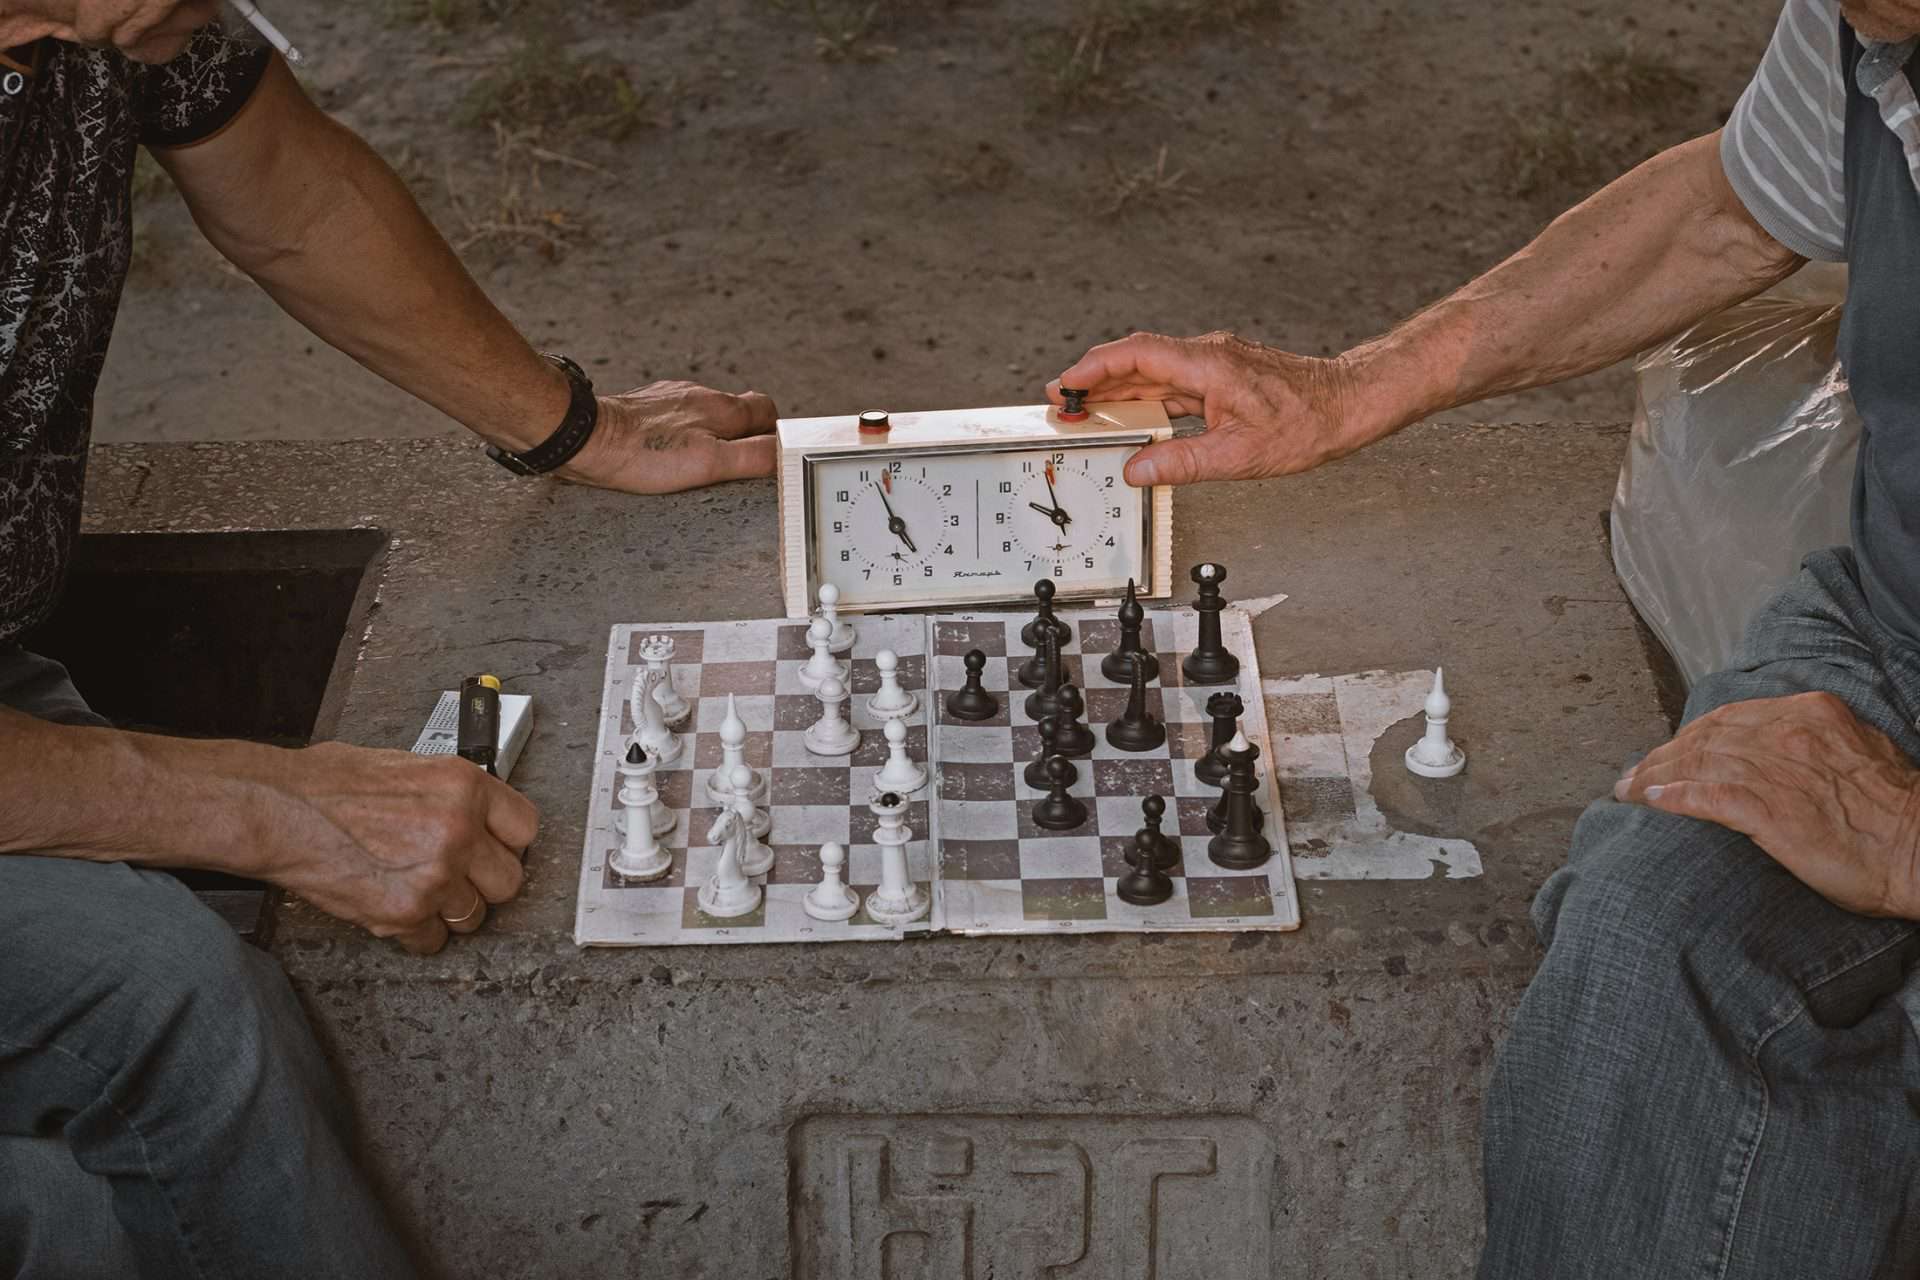 Two chess players playing chess and using an analog chess timer